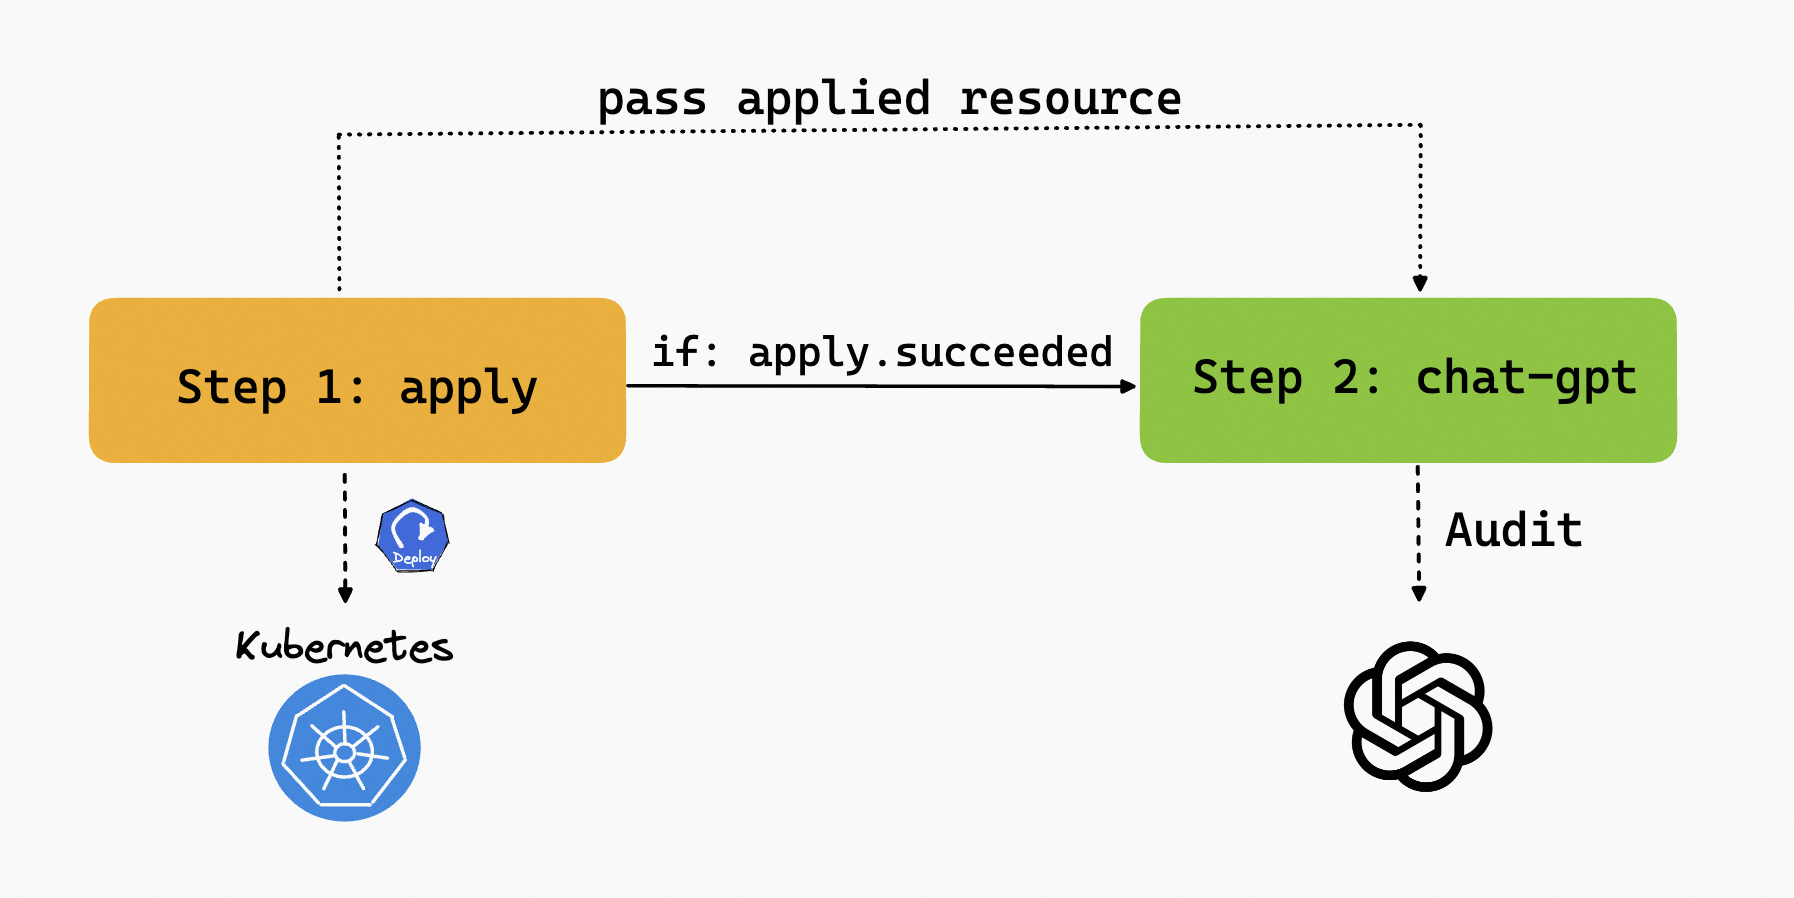 The process of auditing the resource in workflow